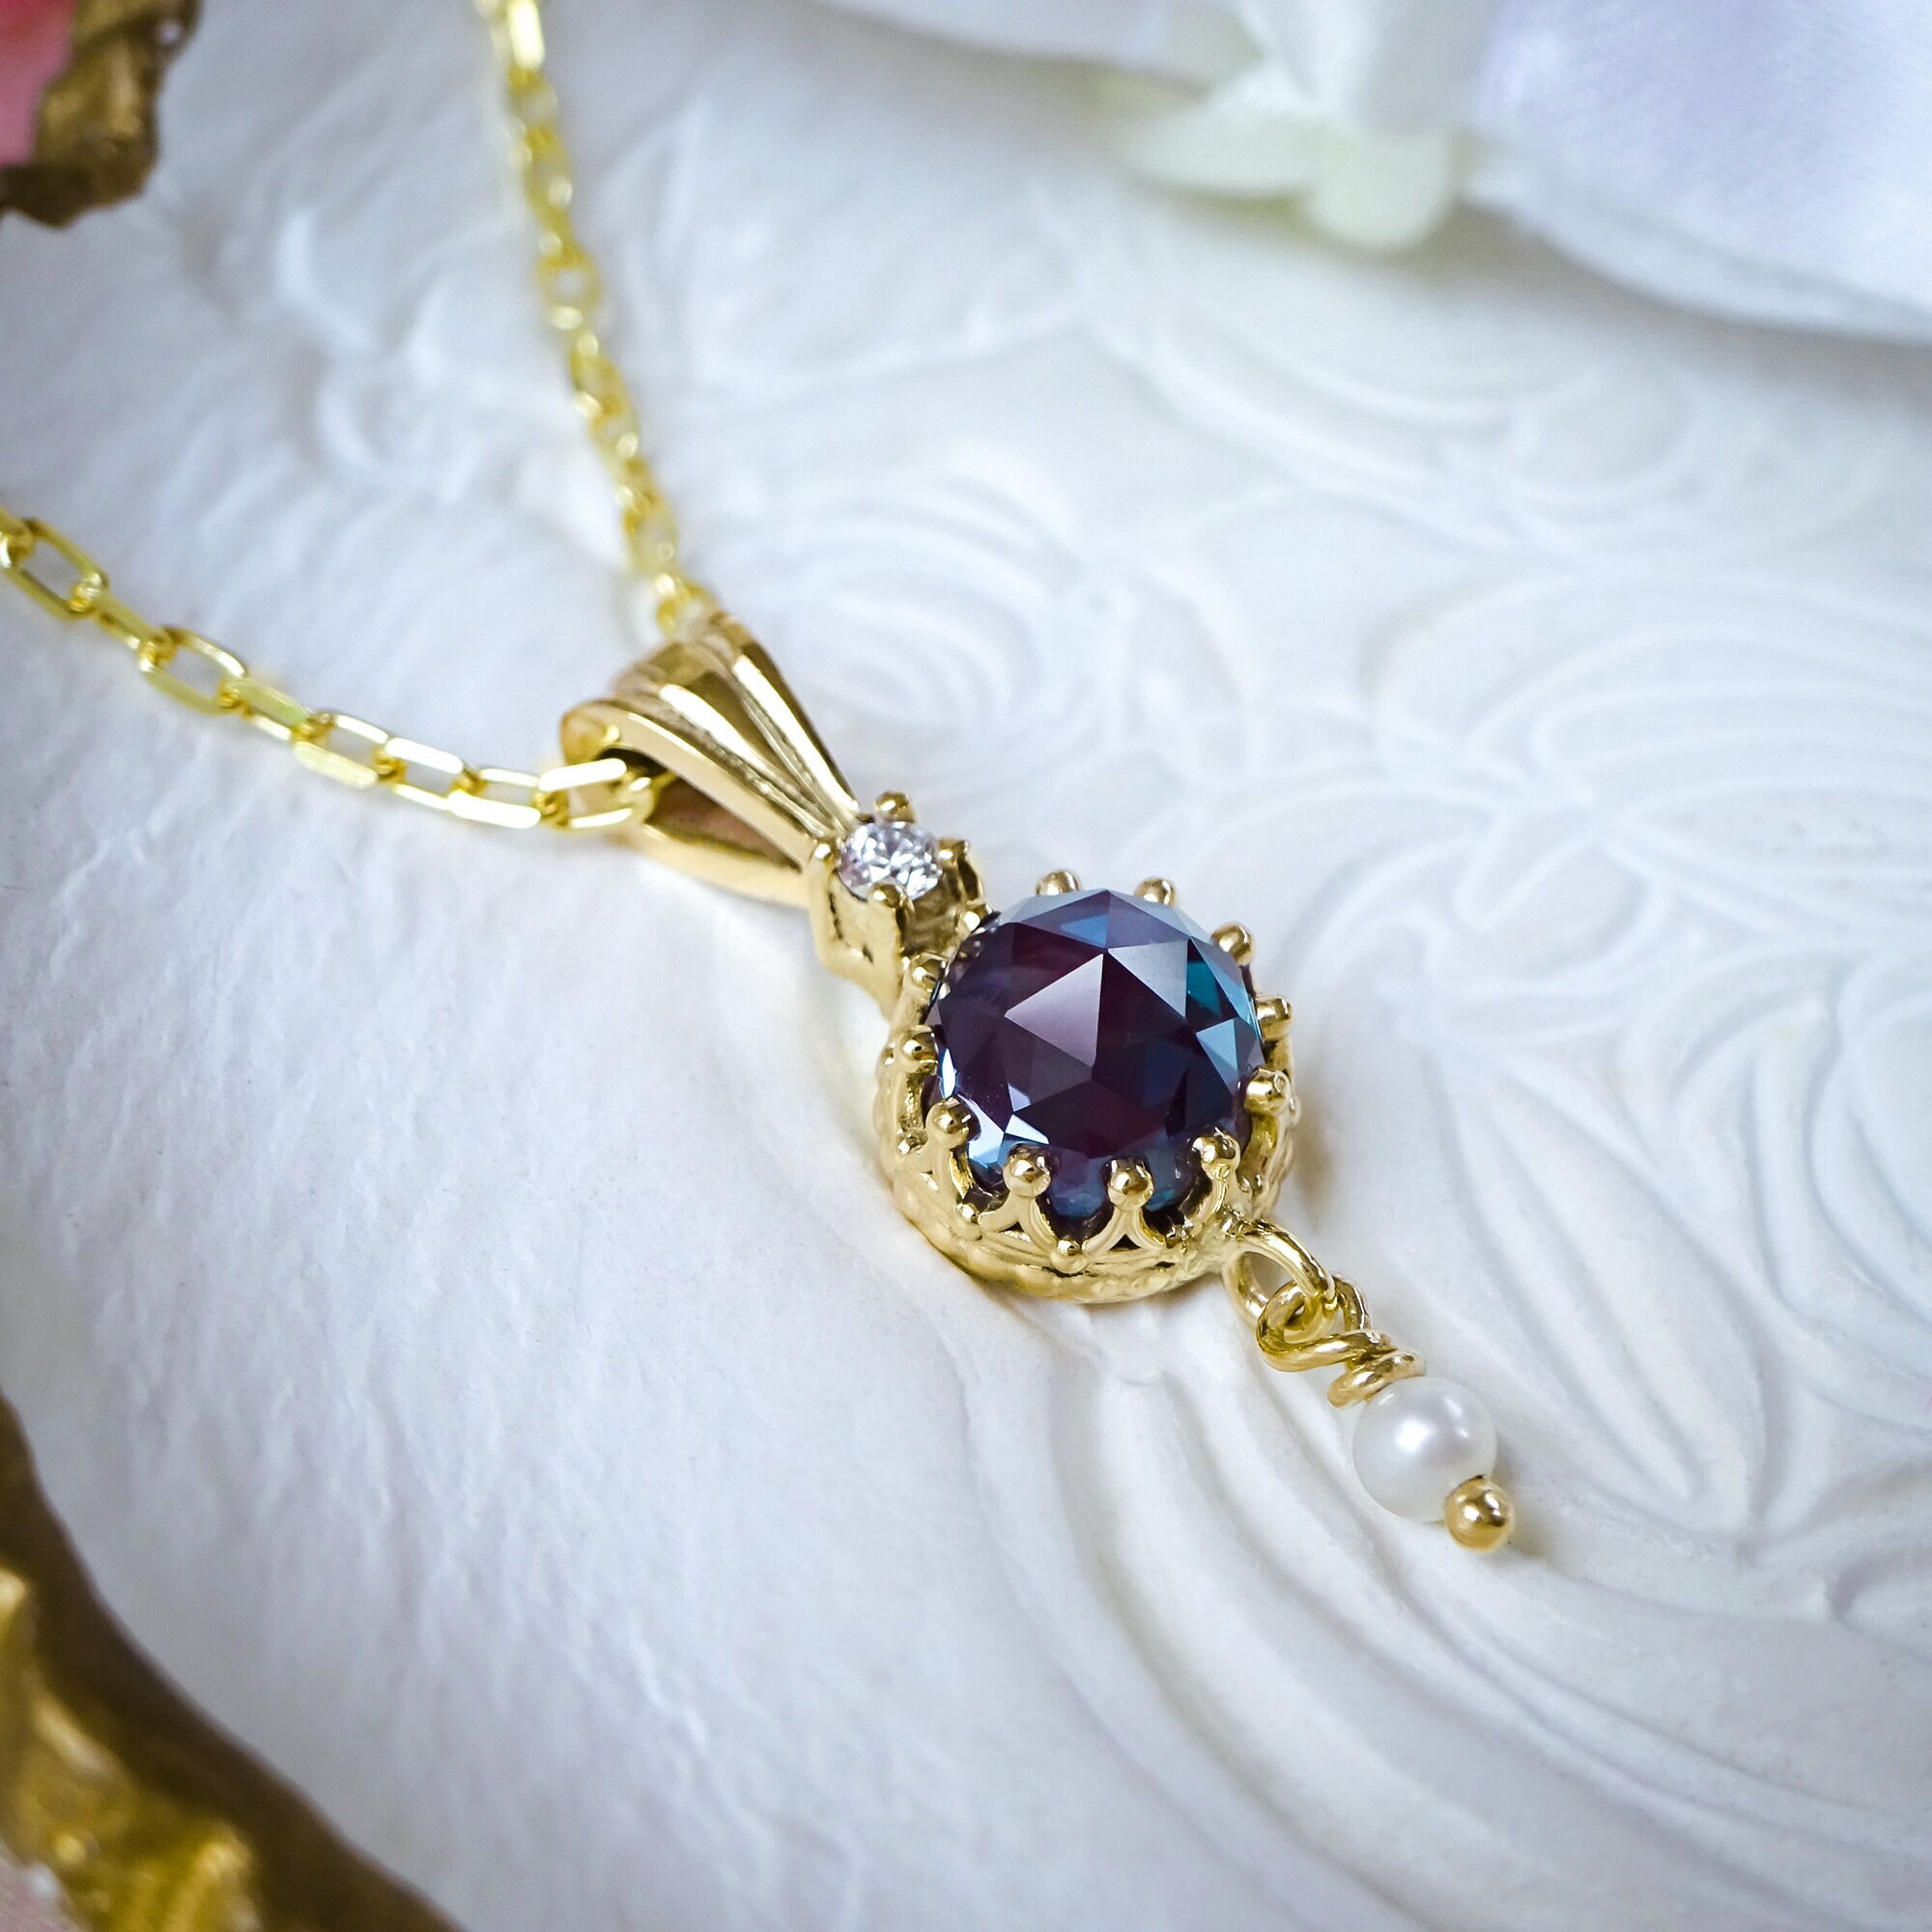 Magnificent Alexandrite Diamond Crown Pendant Necklace in 9Ct/18Ct Solid Gold